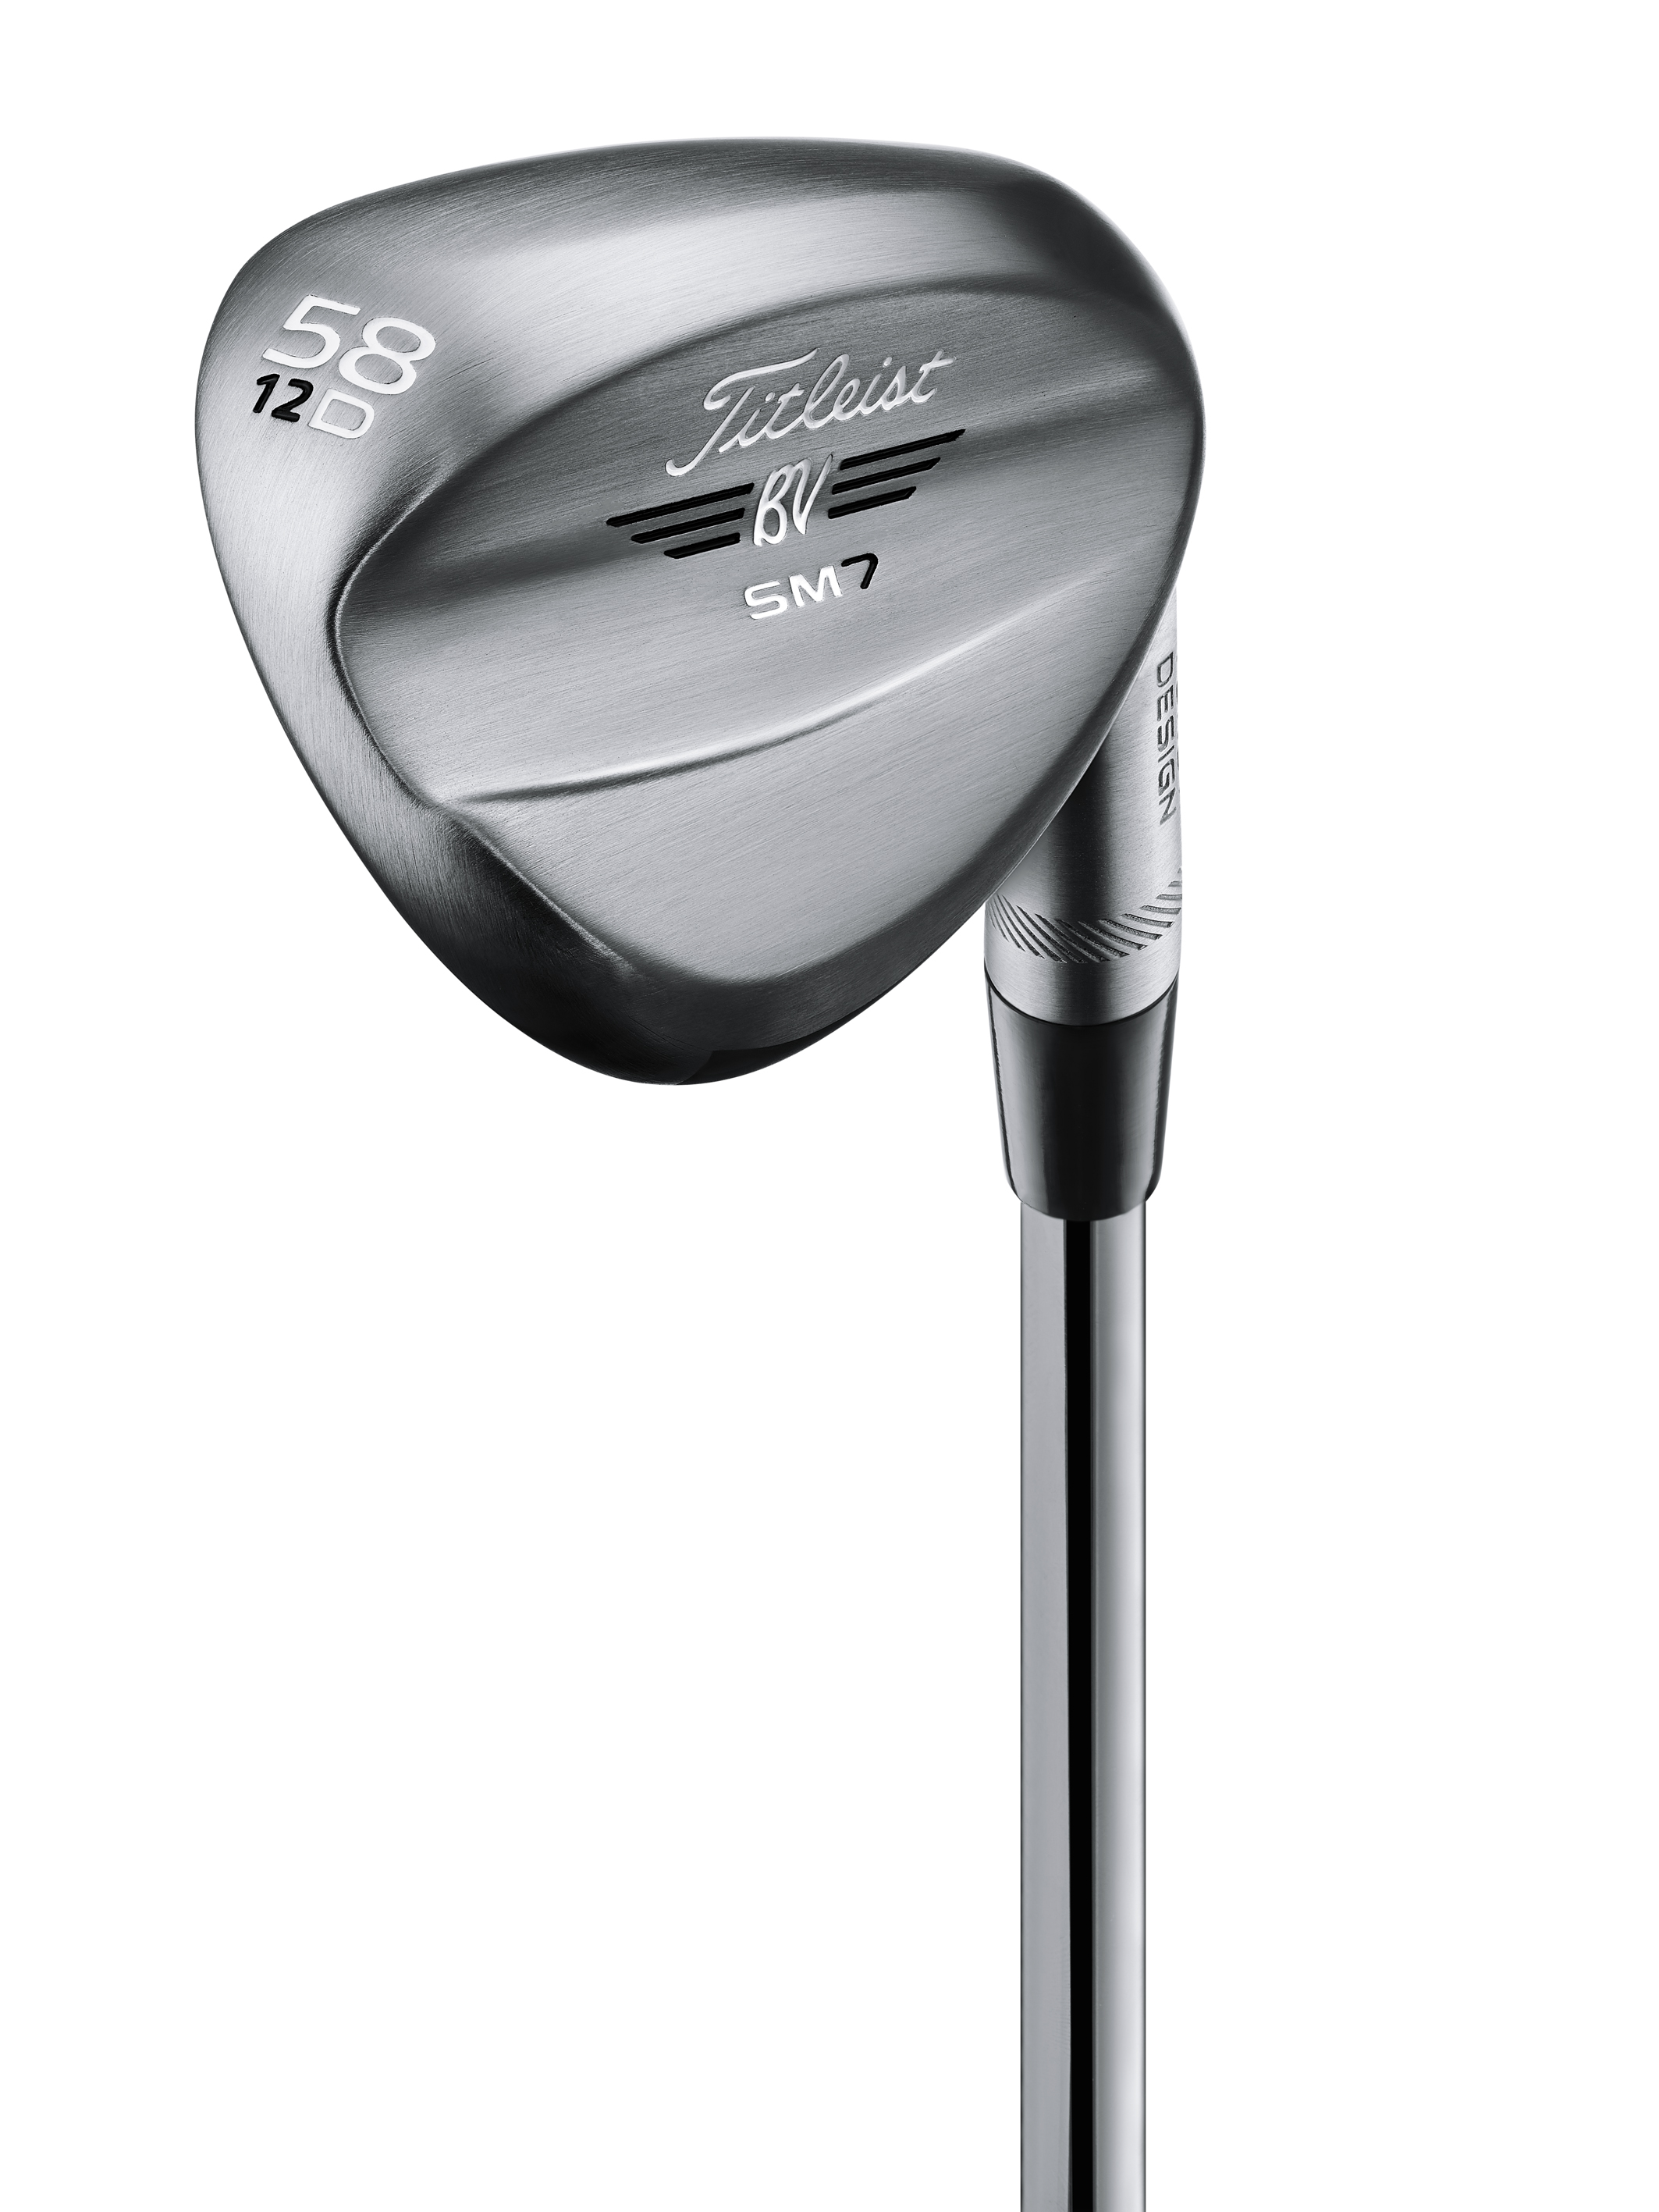 Titleist SM7 Raw wedges feature new heat-treatment technology that